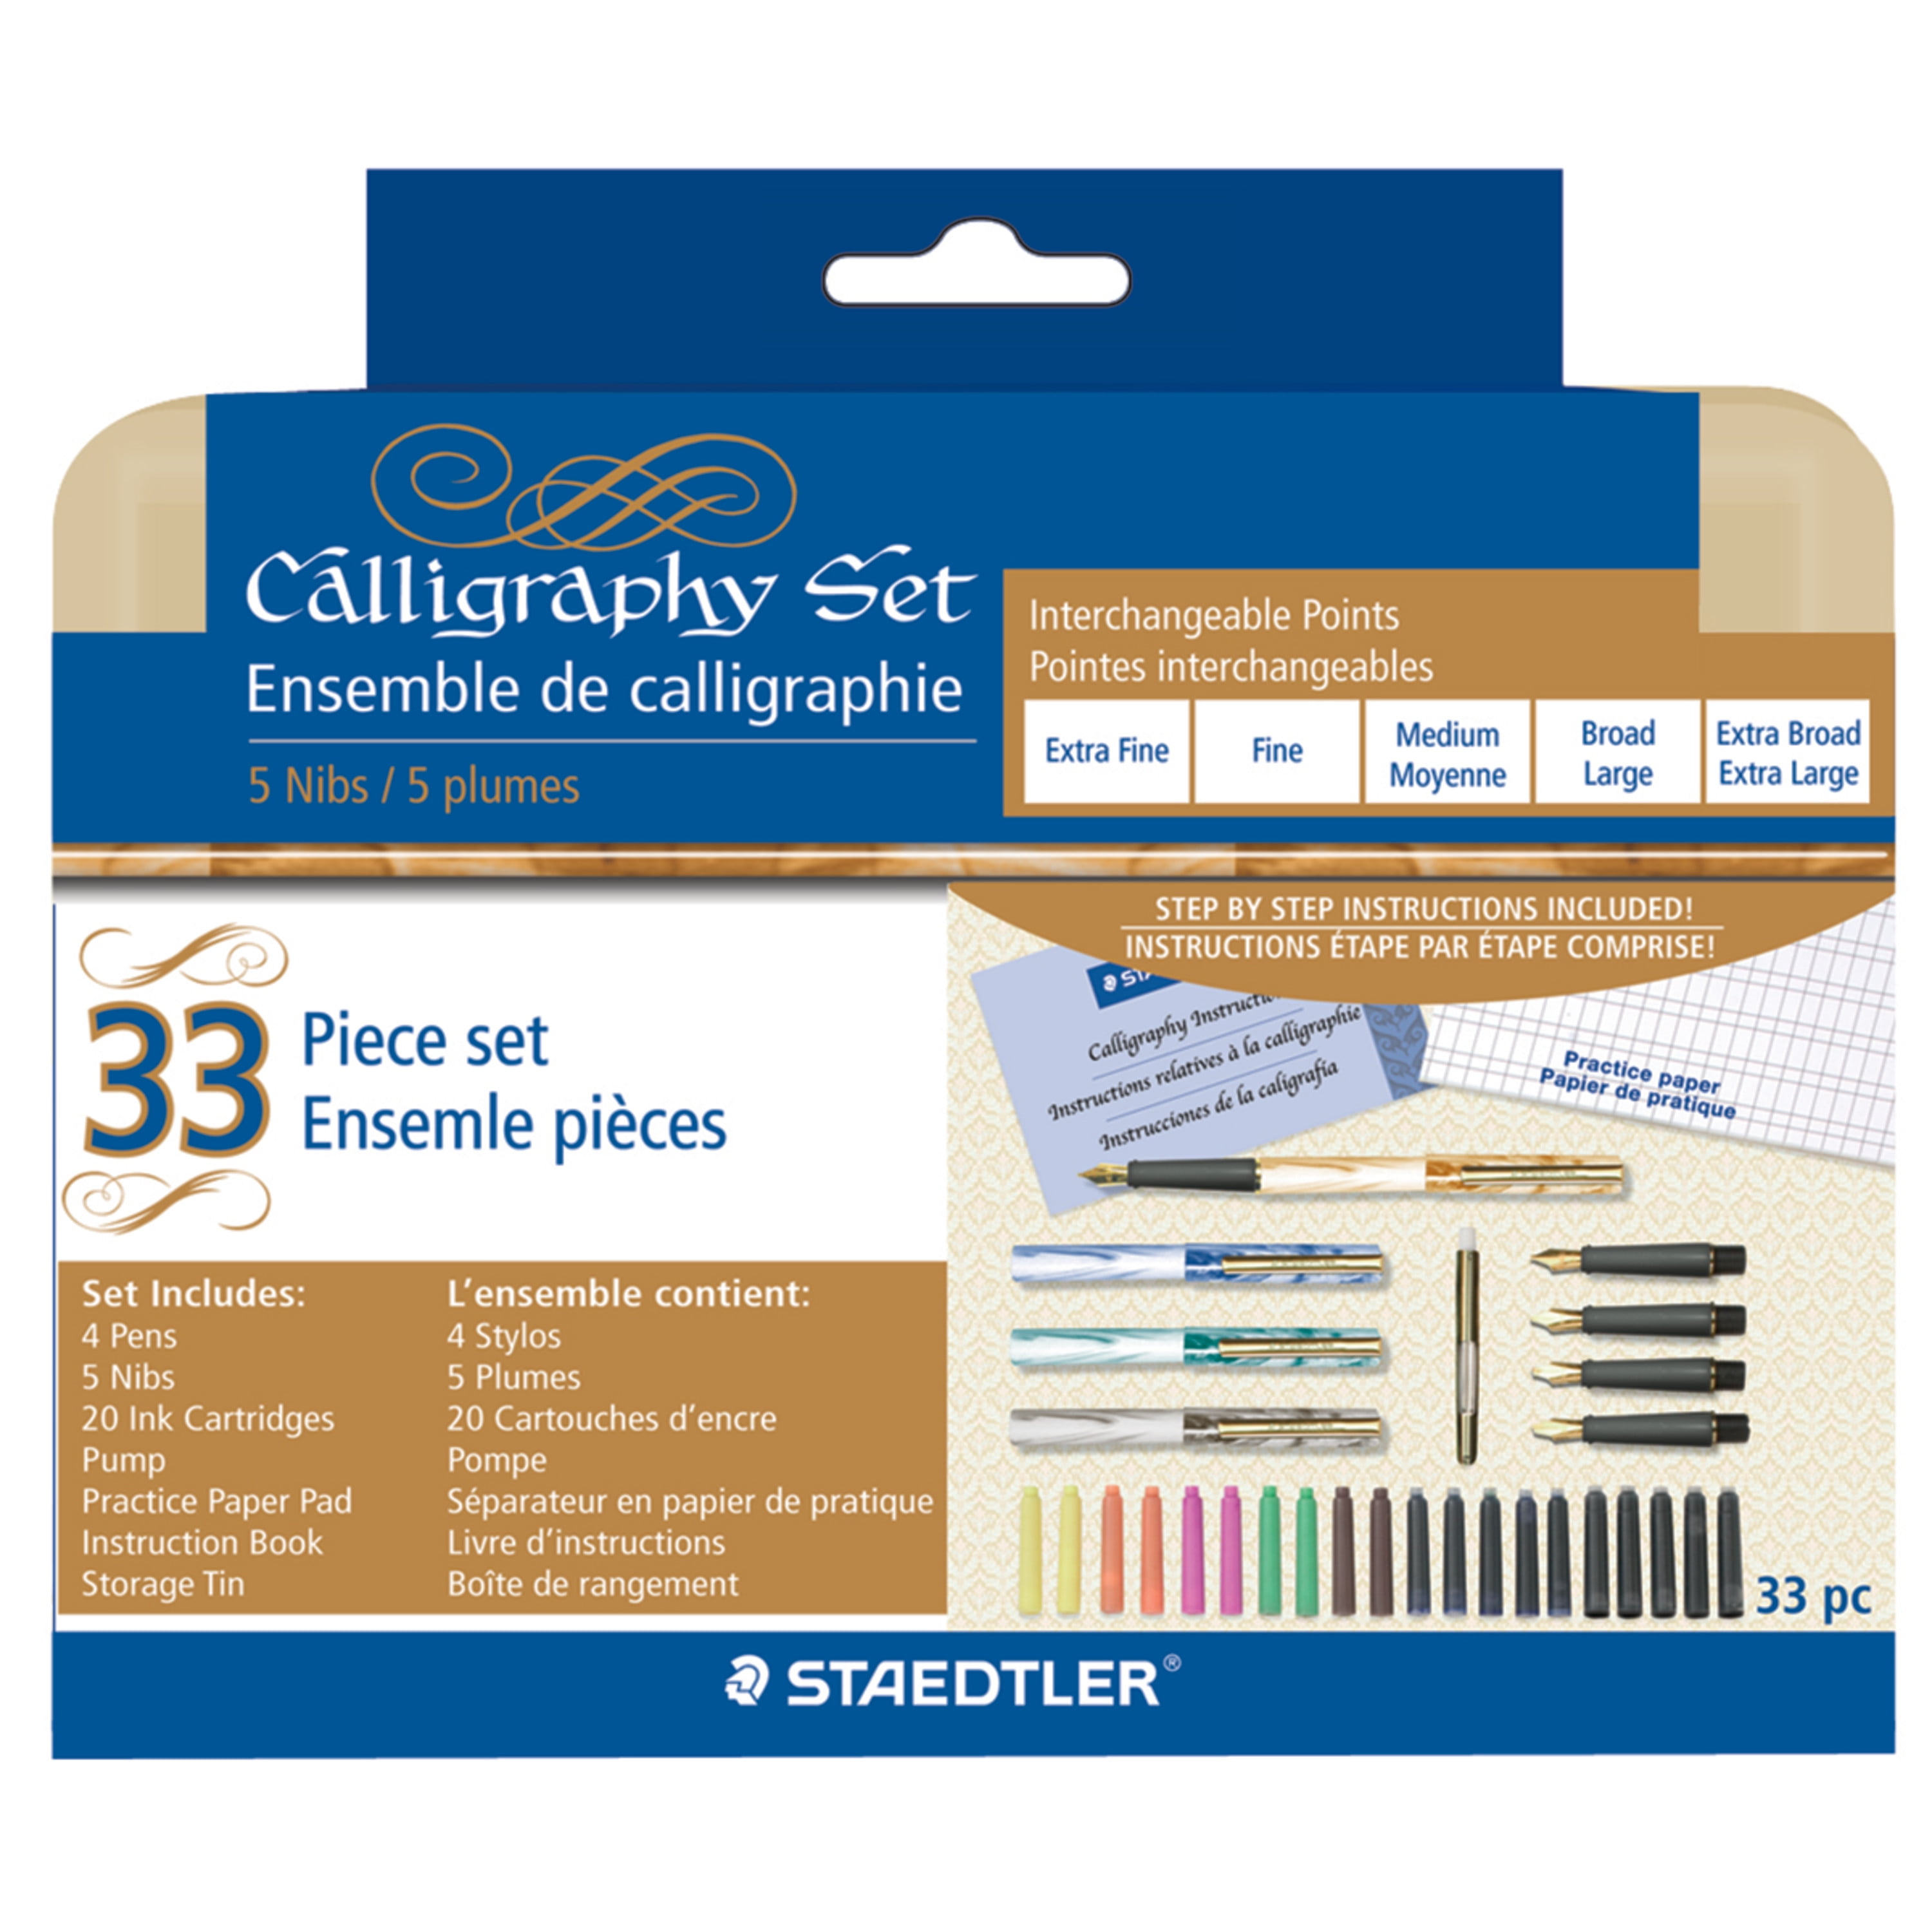 New Sealed Staedtler Calligraphy Pen Set 33 Pieces 4 Pens 5 Nibs 20 Ink Carts 